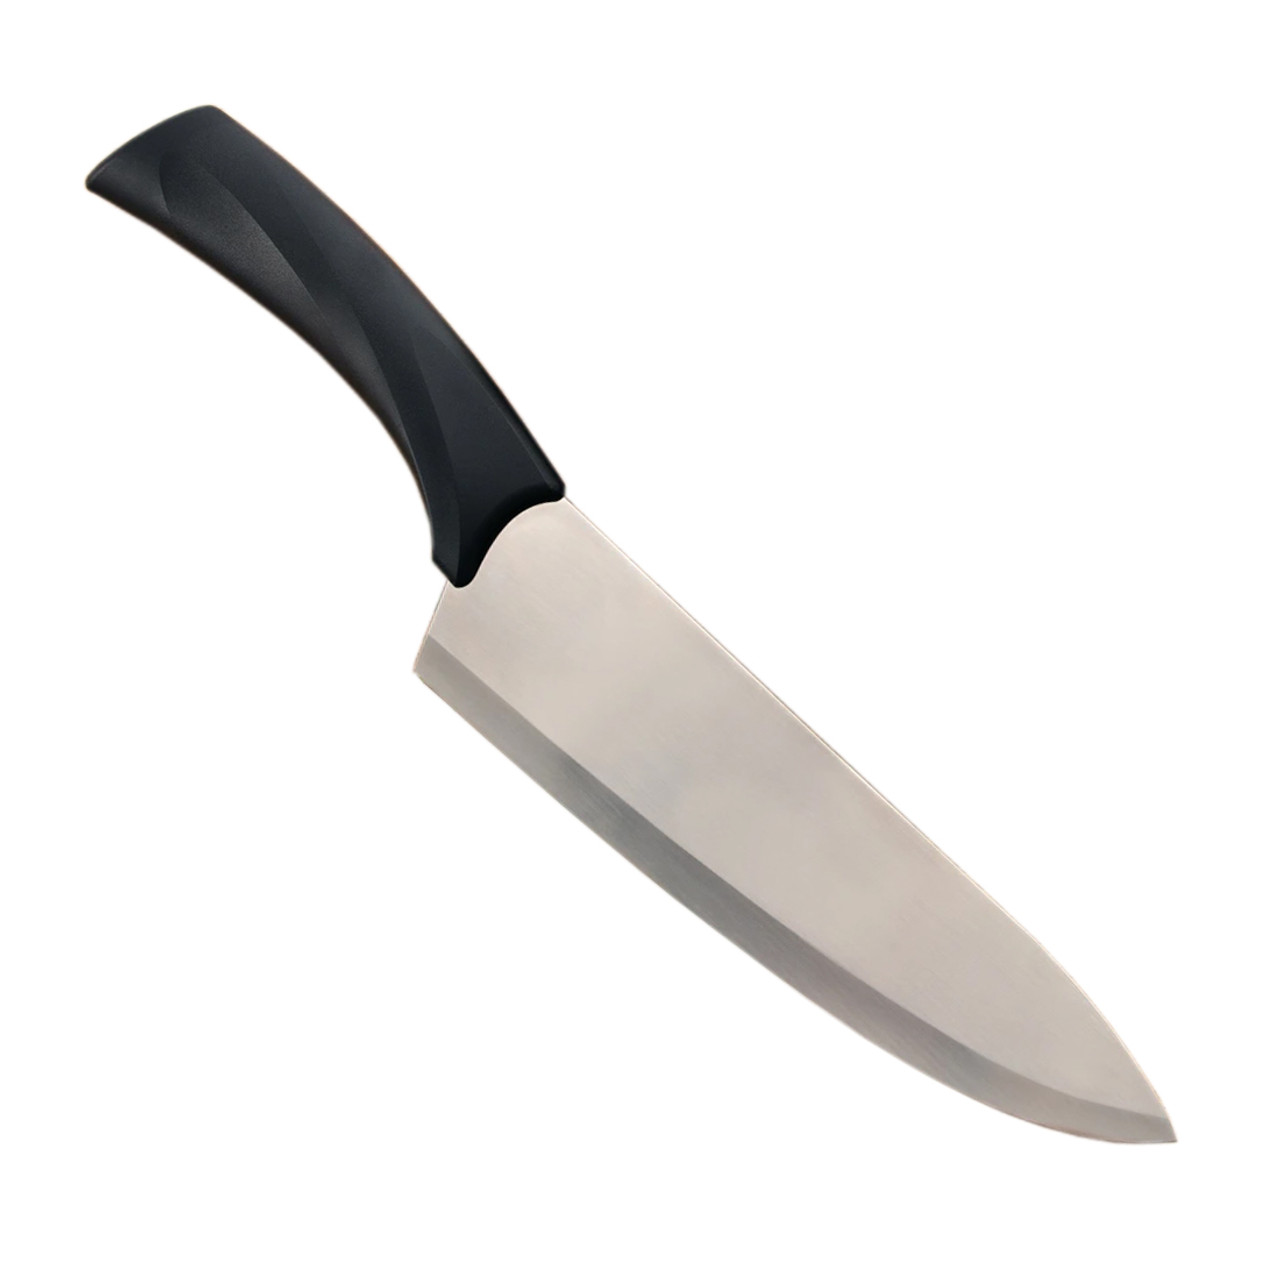 Rada Cutlery American made Kitchen Knife Deals - Choose from 8